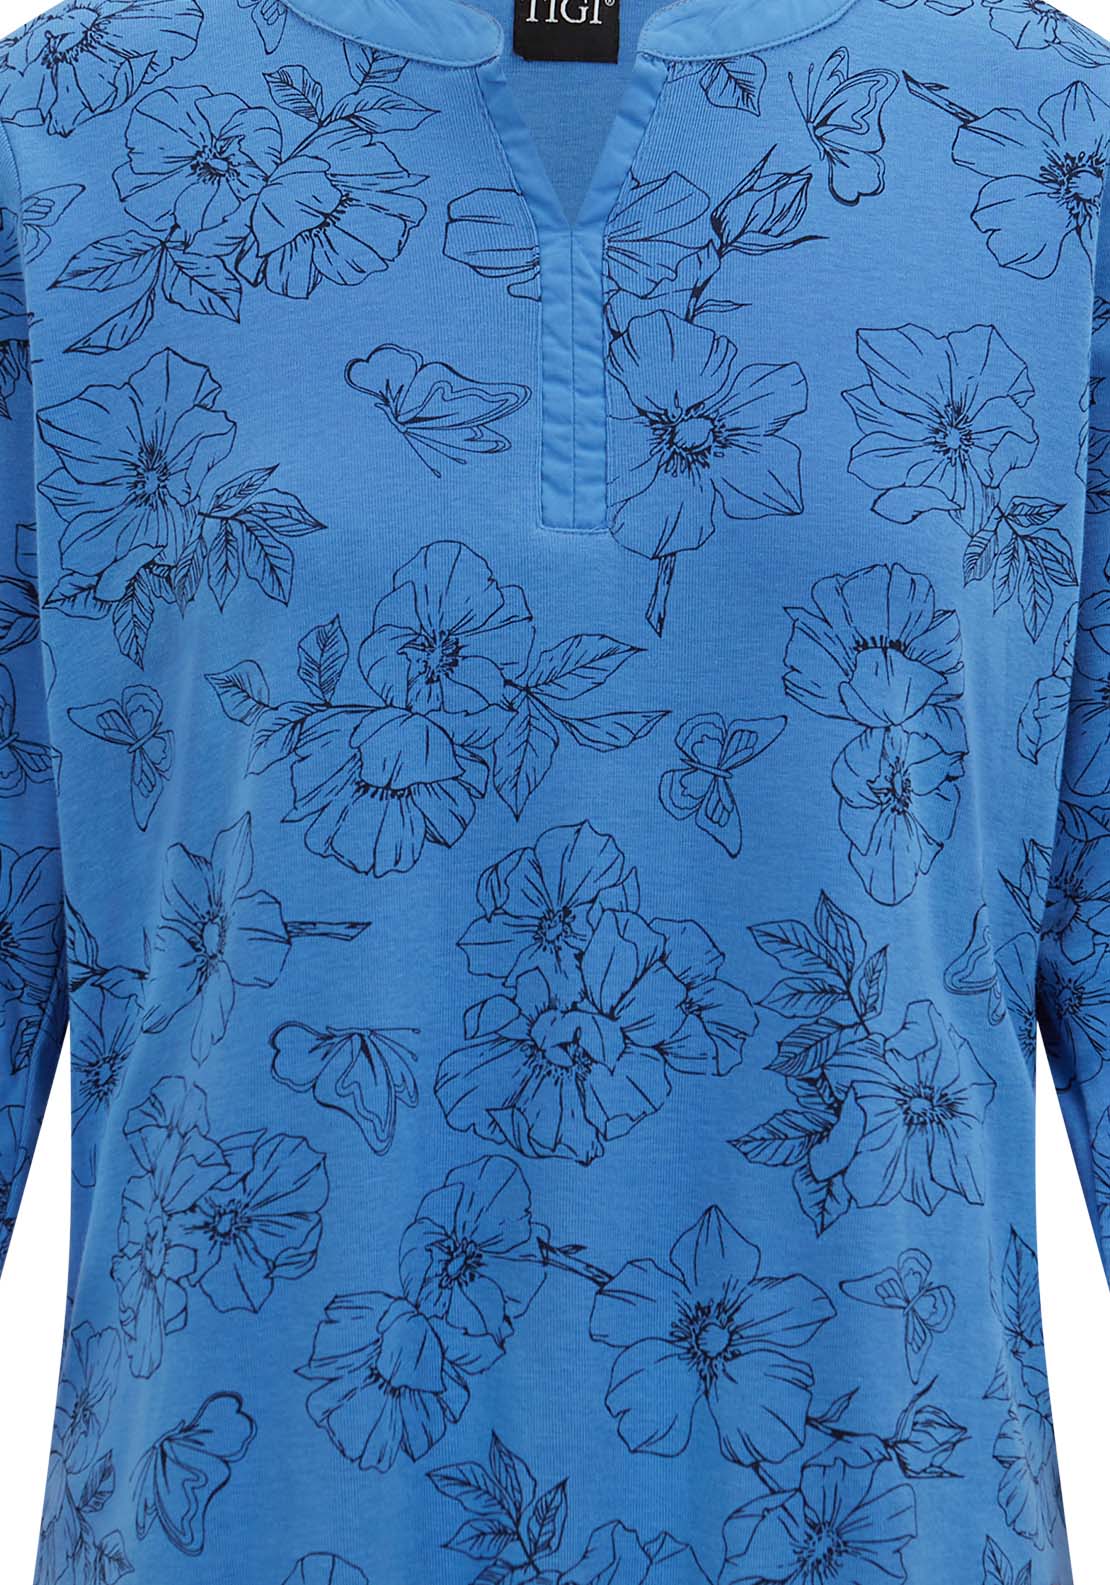 Tigiwear Flora And Butterfly Print Top 6 Shaws Department Stores